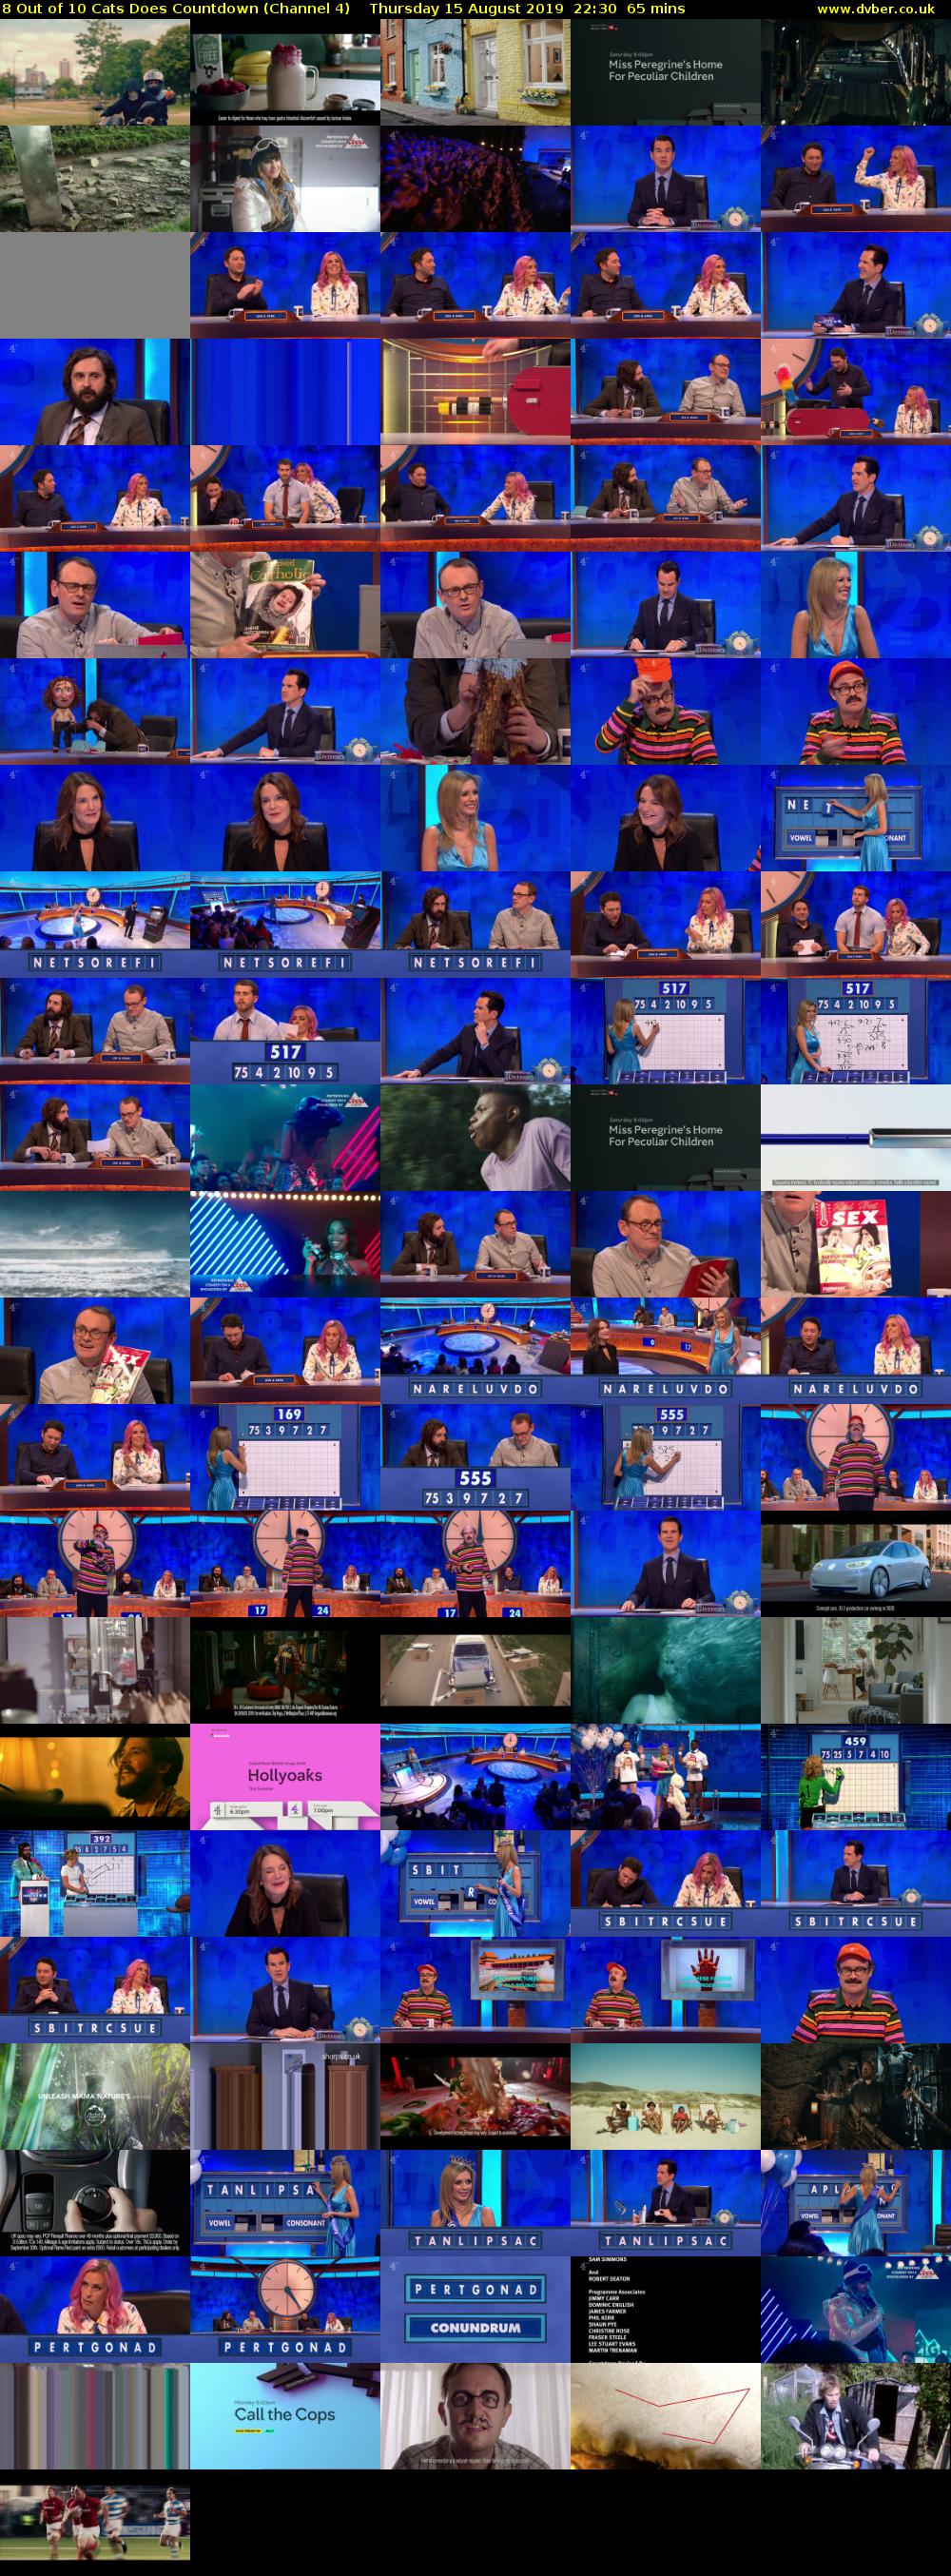 8 Out of 10 Cats Does Countdown (Channel 4) Thursday 15 August 2019 22:30 - 23:35